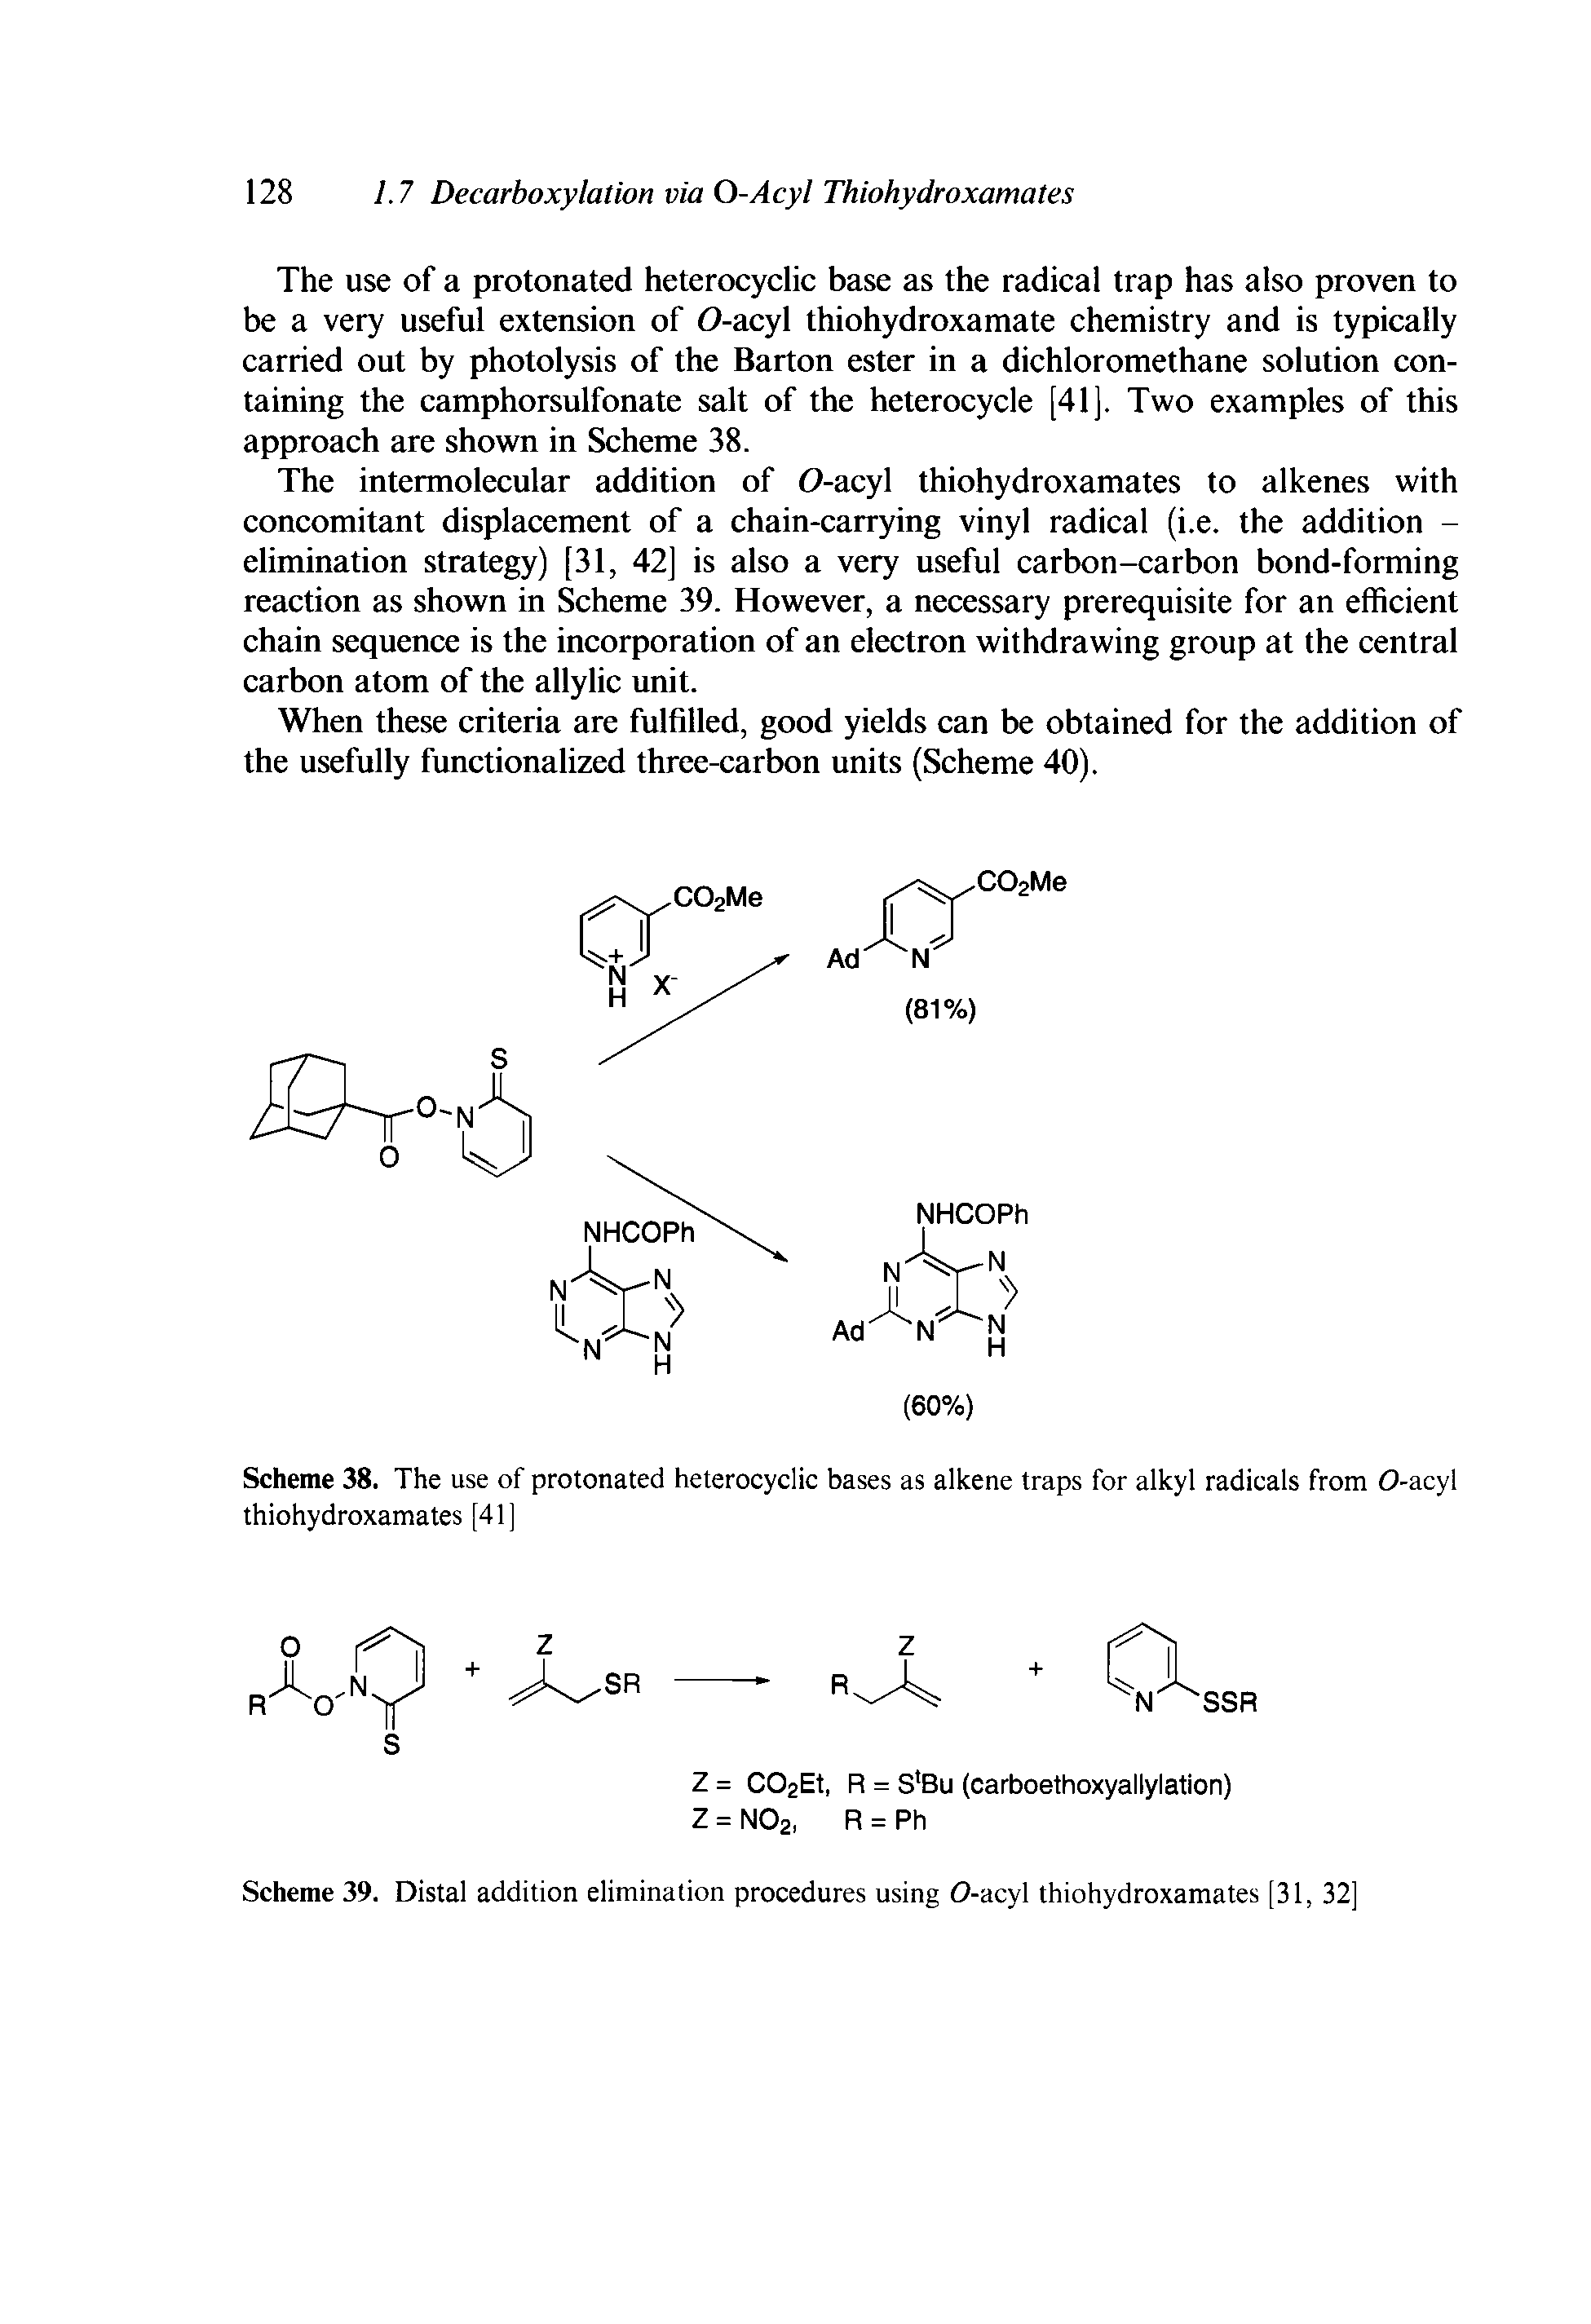 Scheme 38. The use of protonated heterocyclic bases as alkene traps for alkyl radicals from 0-acyl thiohydroxamates [41]...